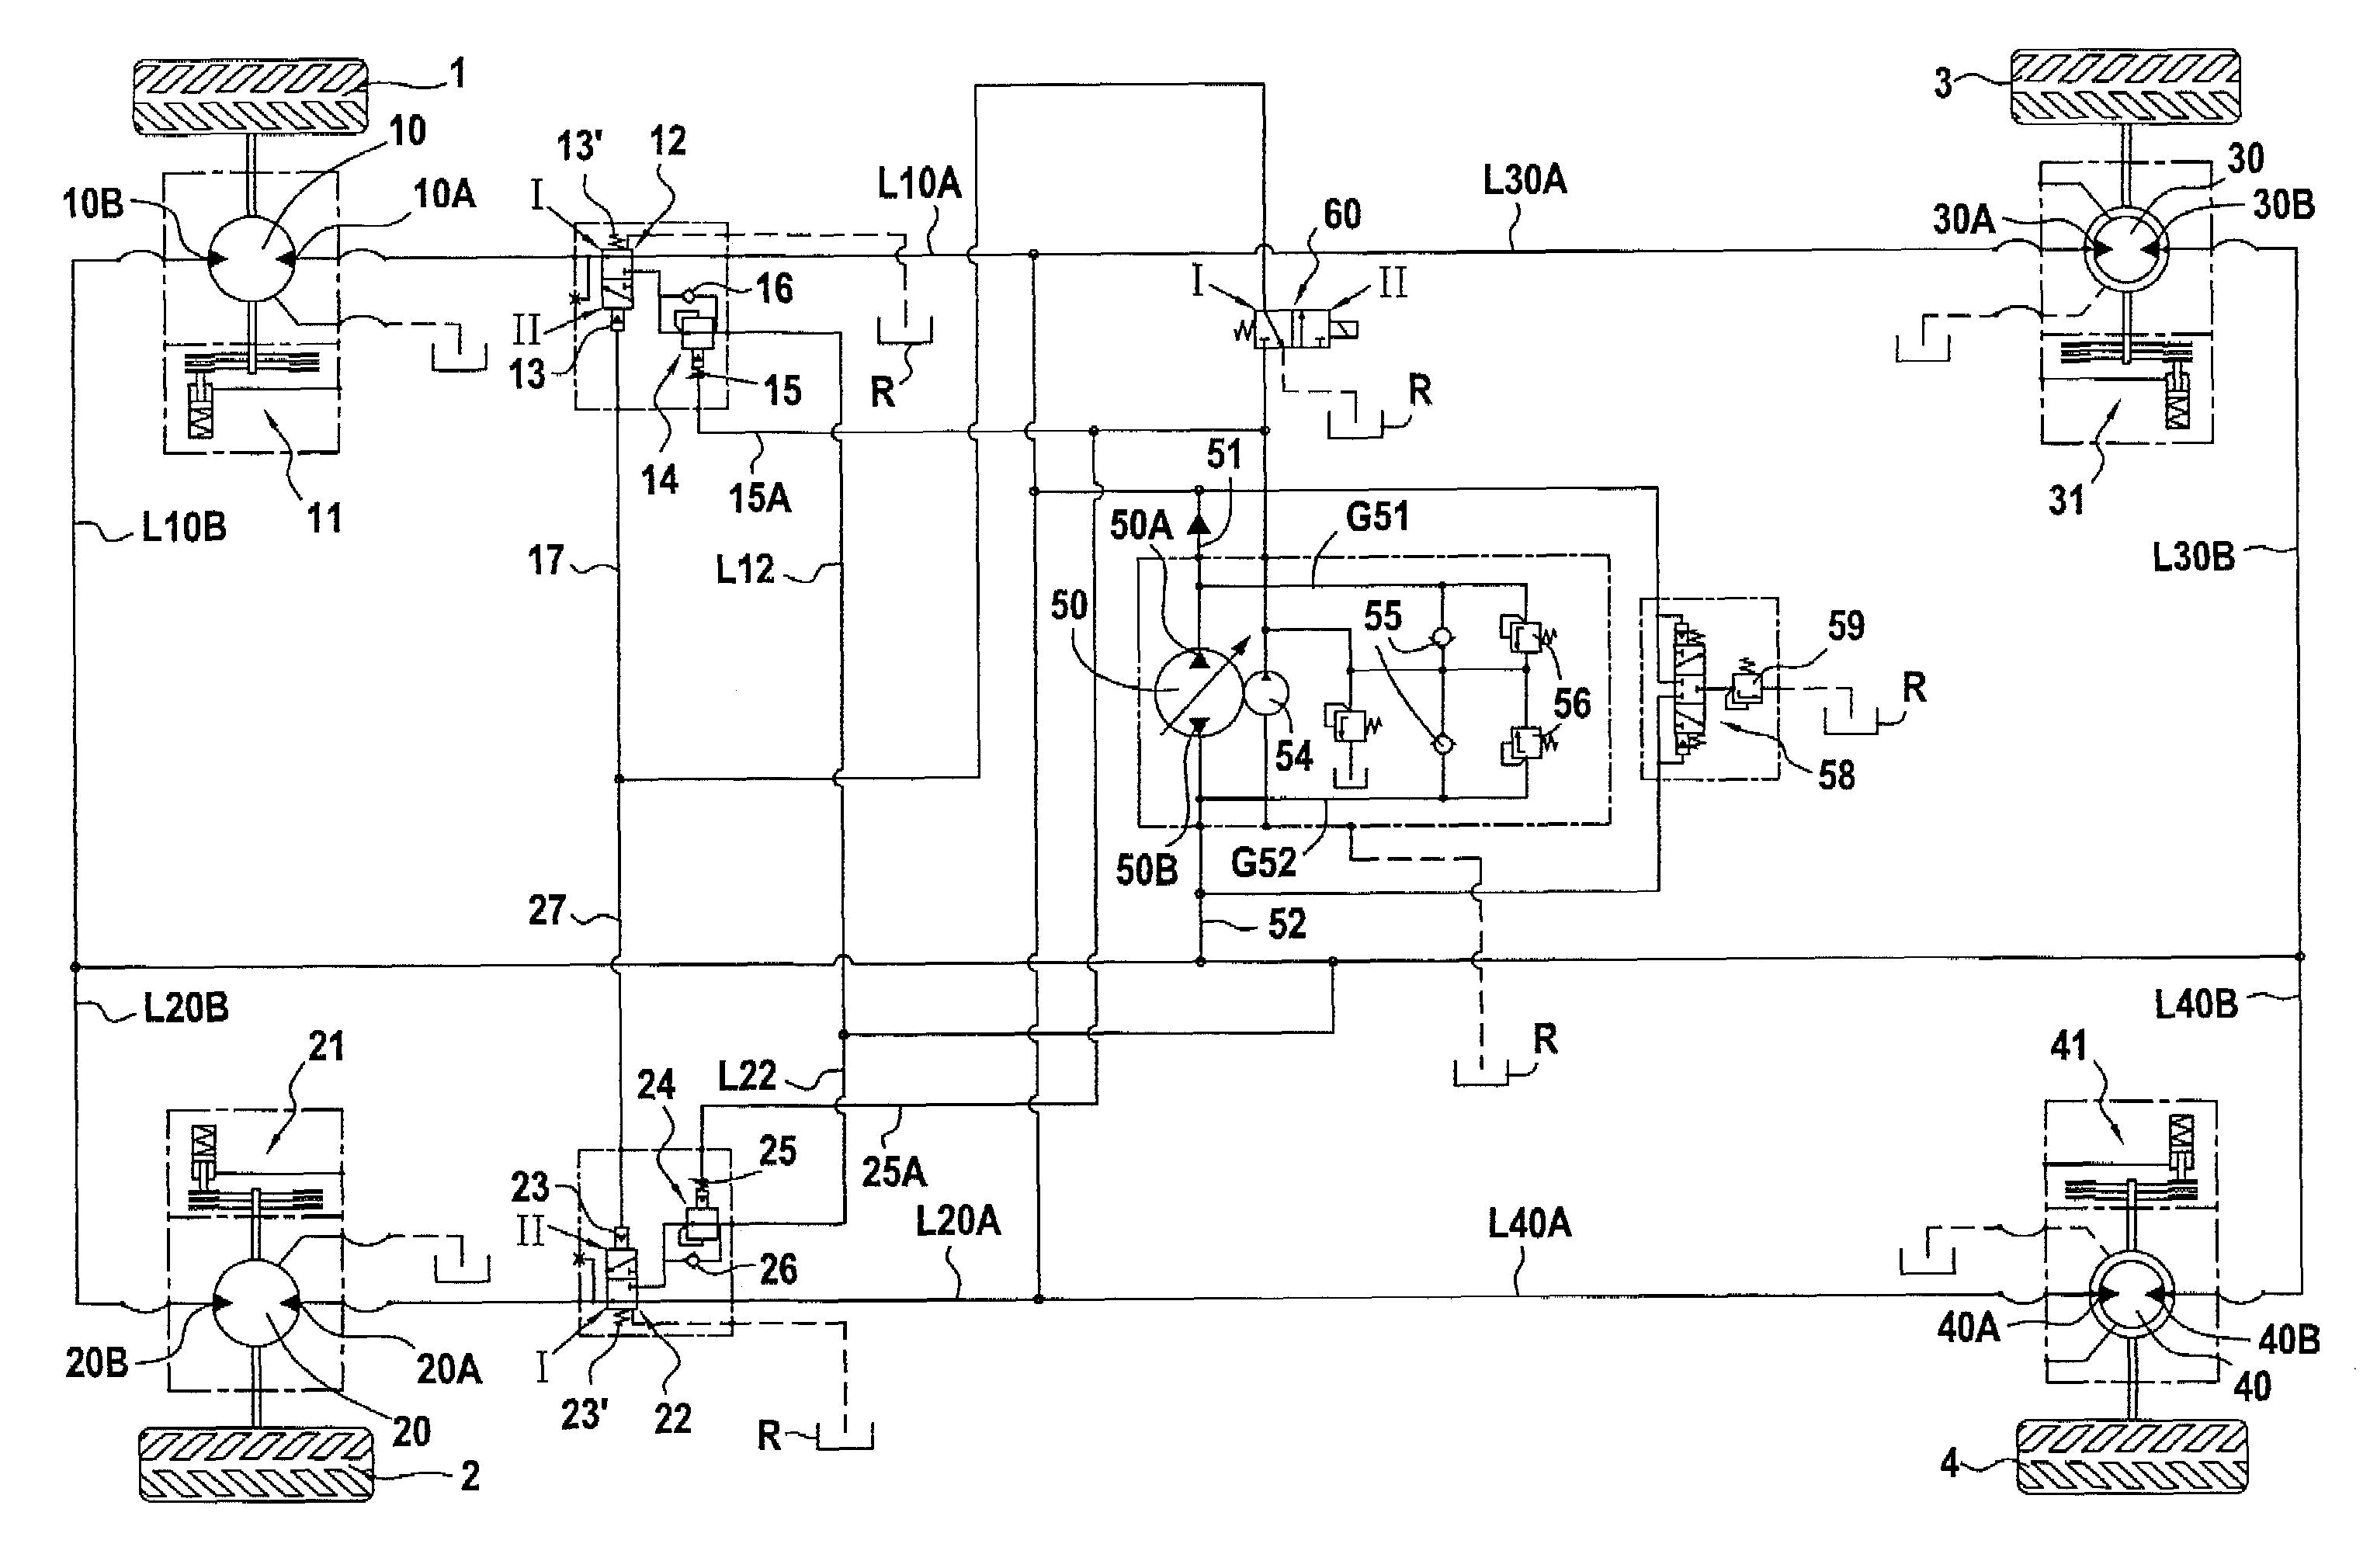 Hydrostatic transmission device for a heavy vehicle